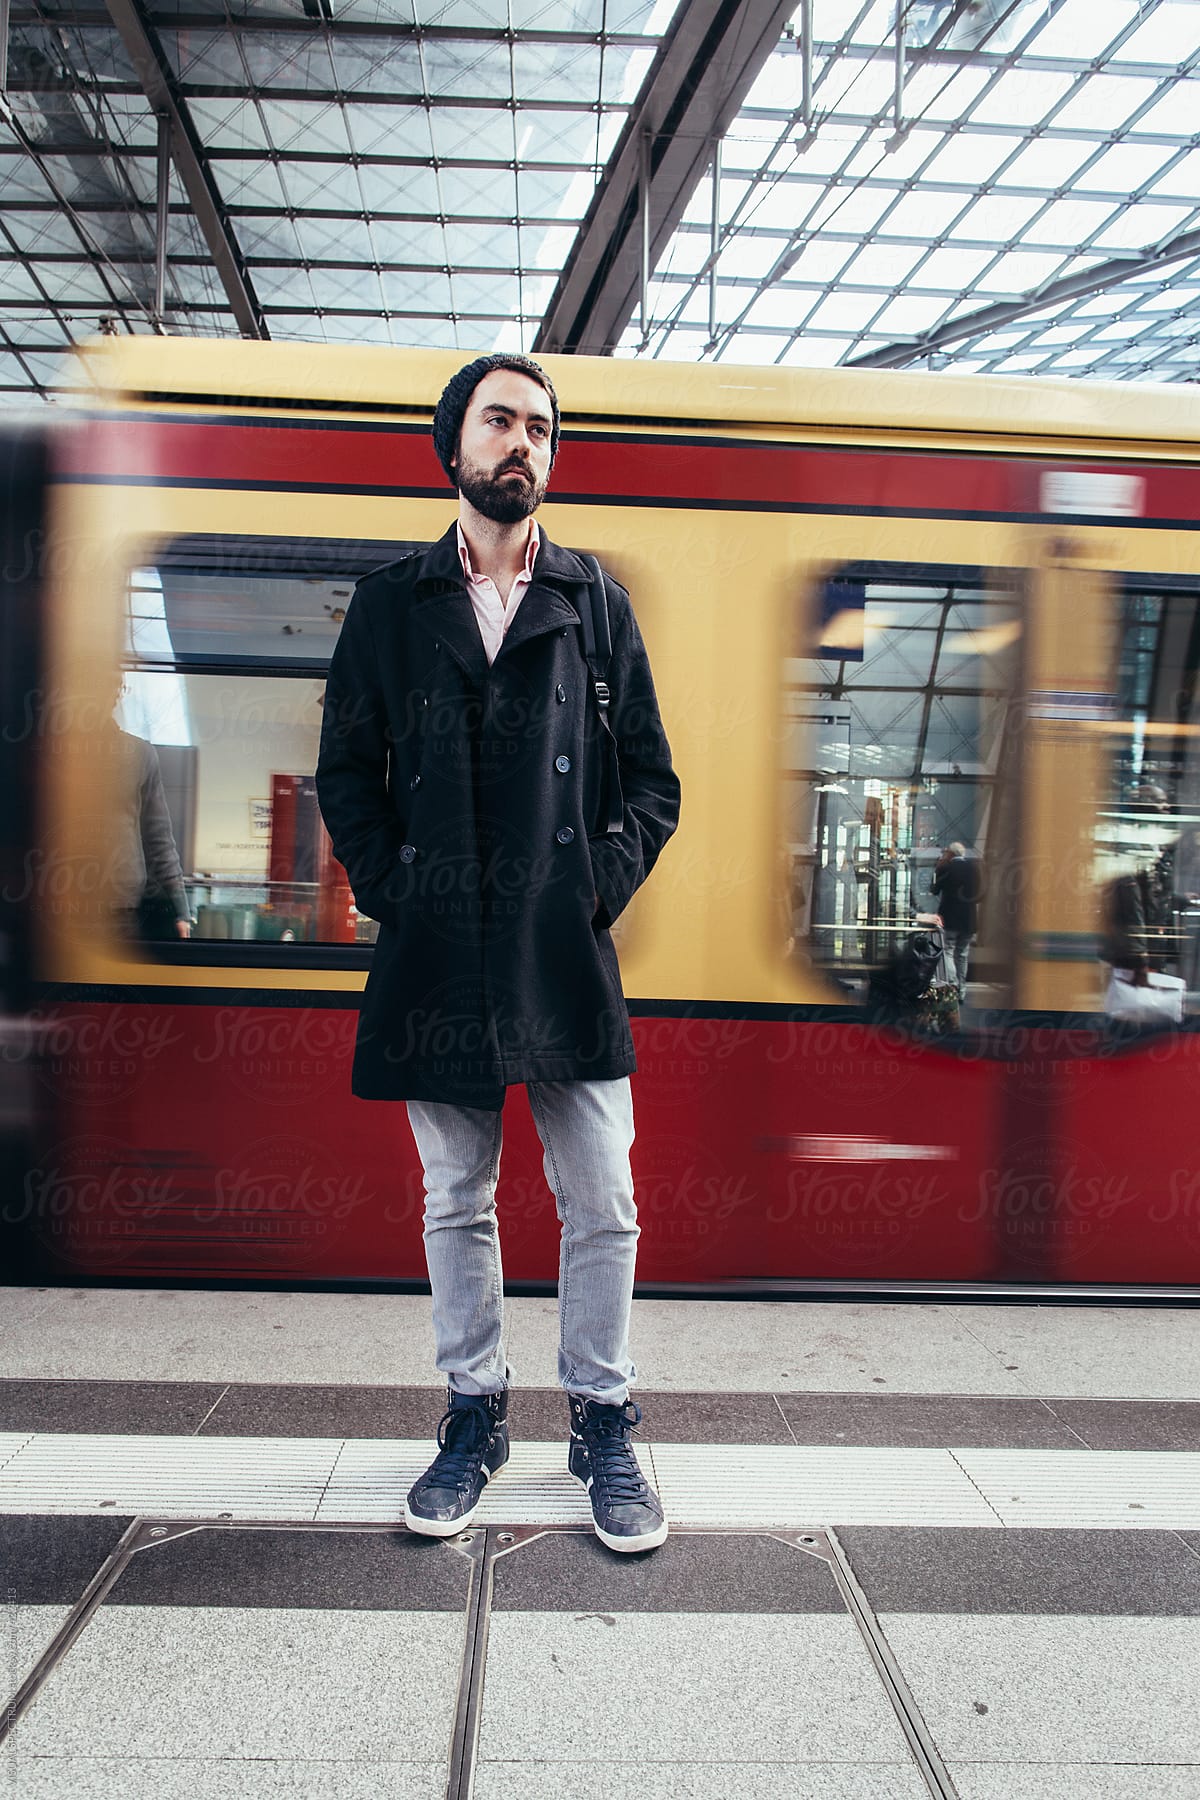 Man With Beard and Beanie Standing in Train Station